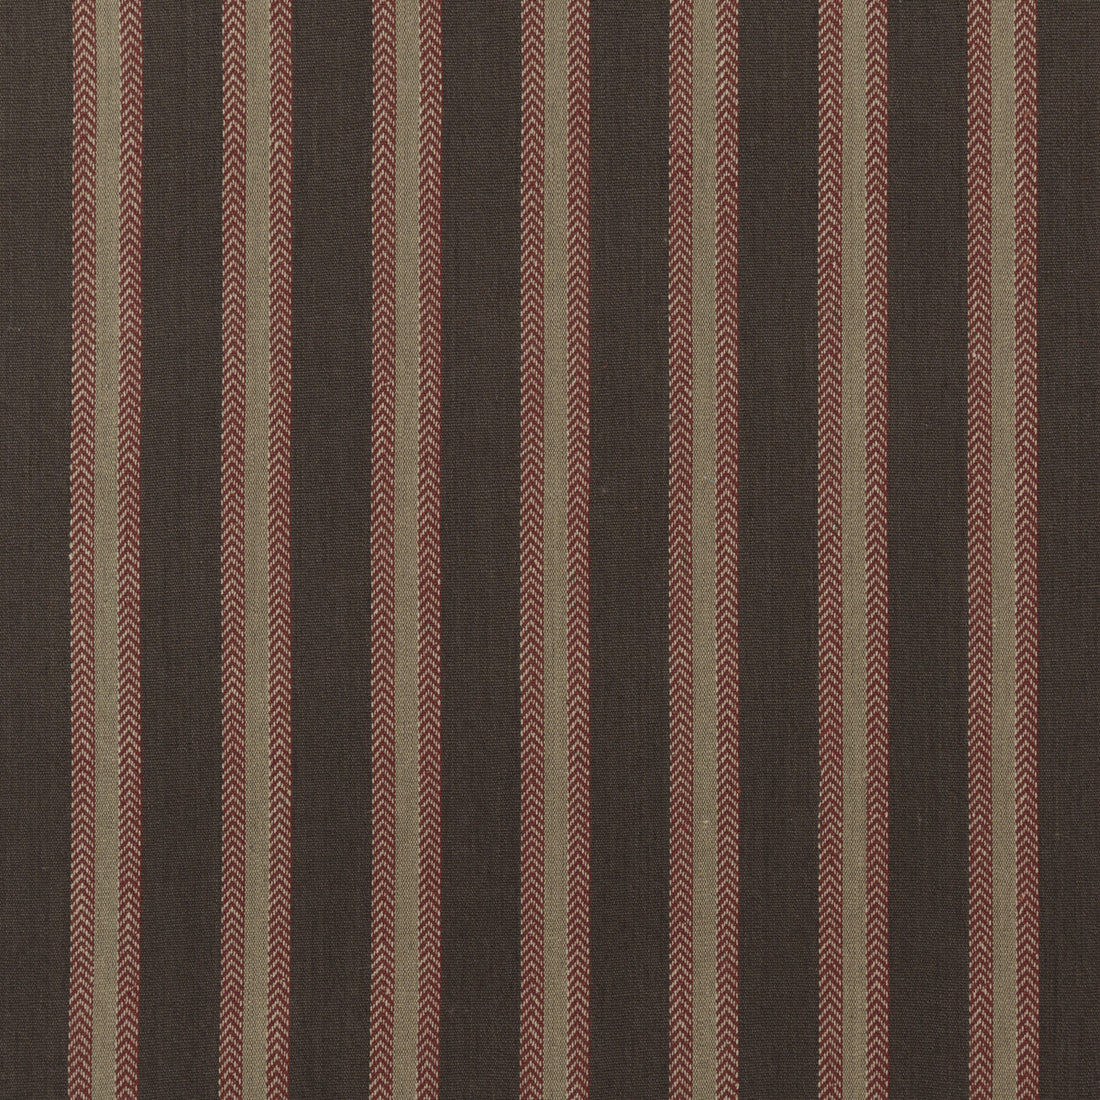 Chester Stripe fabric in woodsmoke/russet color - pattern FD760.A132.0 - by Mulberry in the Festival collection